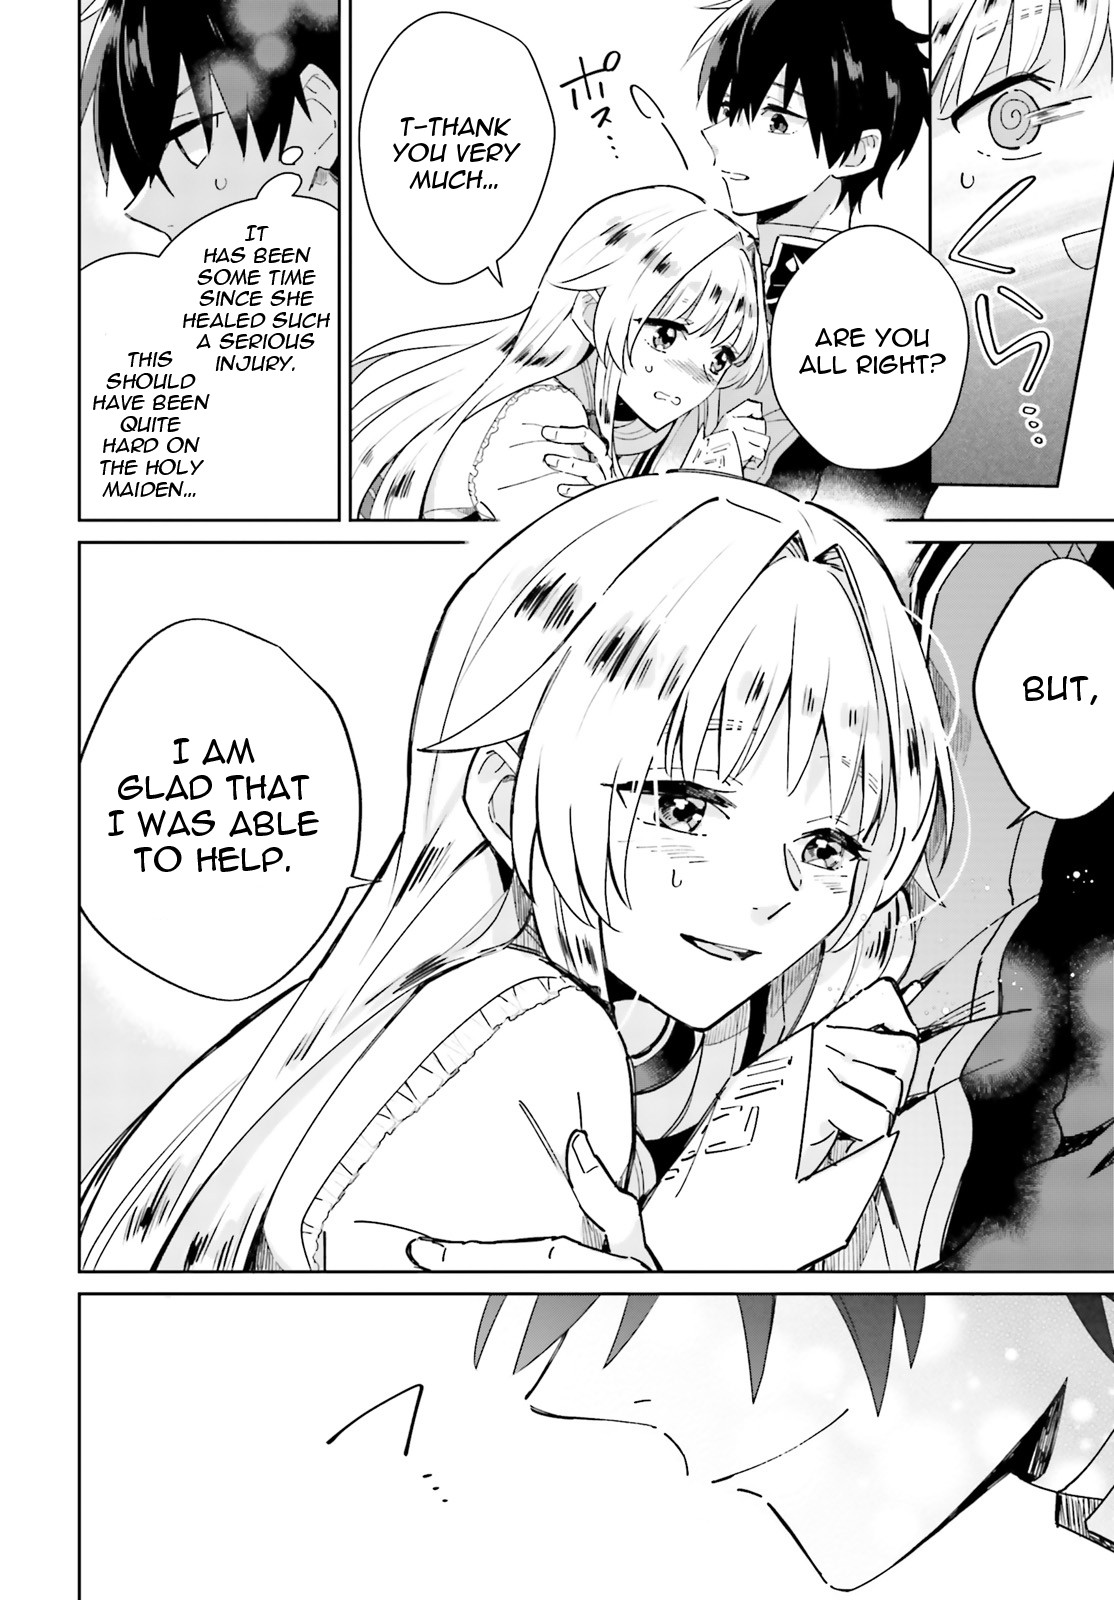 I Want To Pamper The Holy Maiden! But Hero, You’Re No Good. Chapter 3 #20